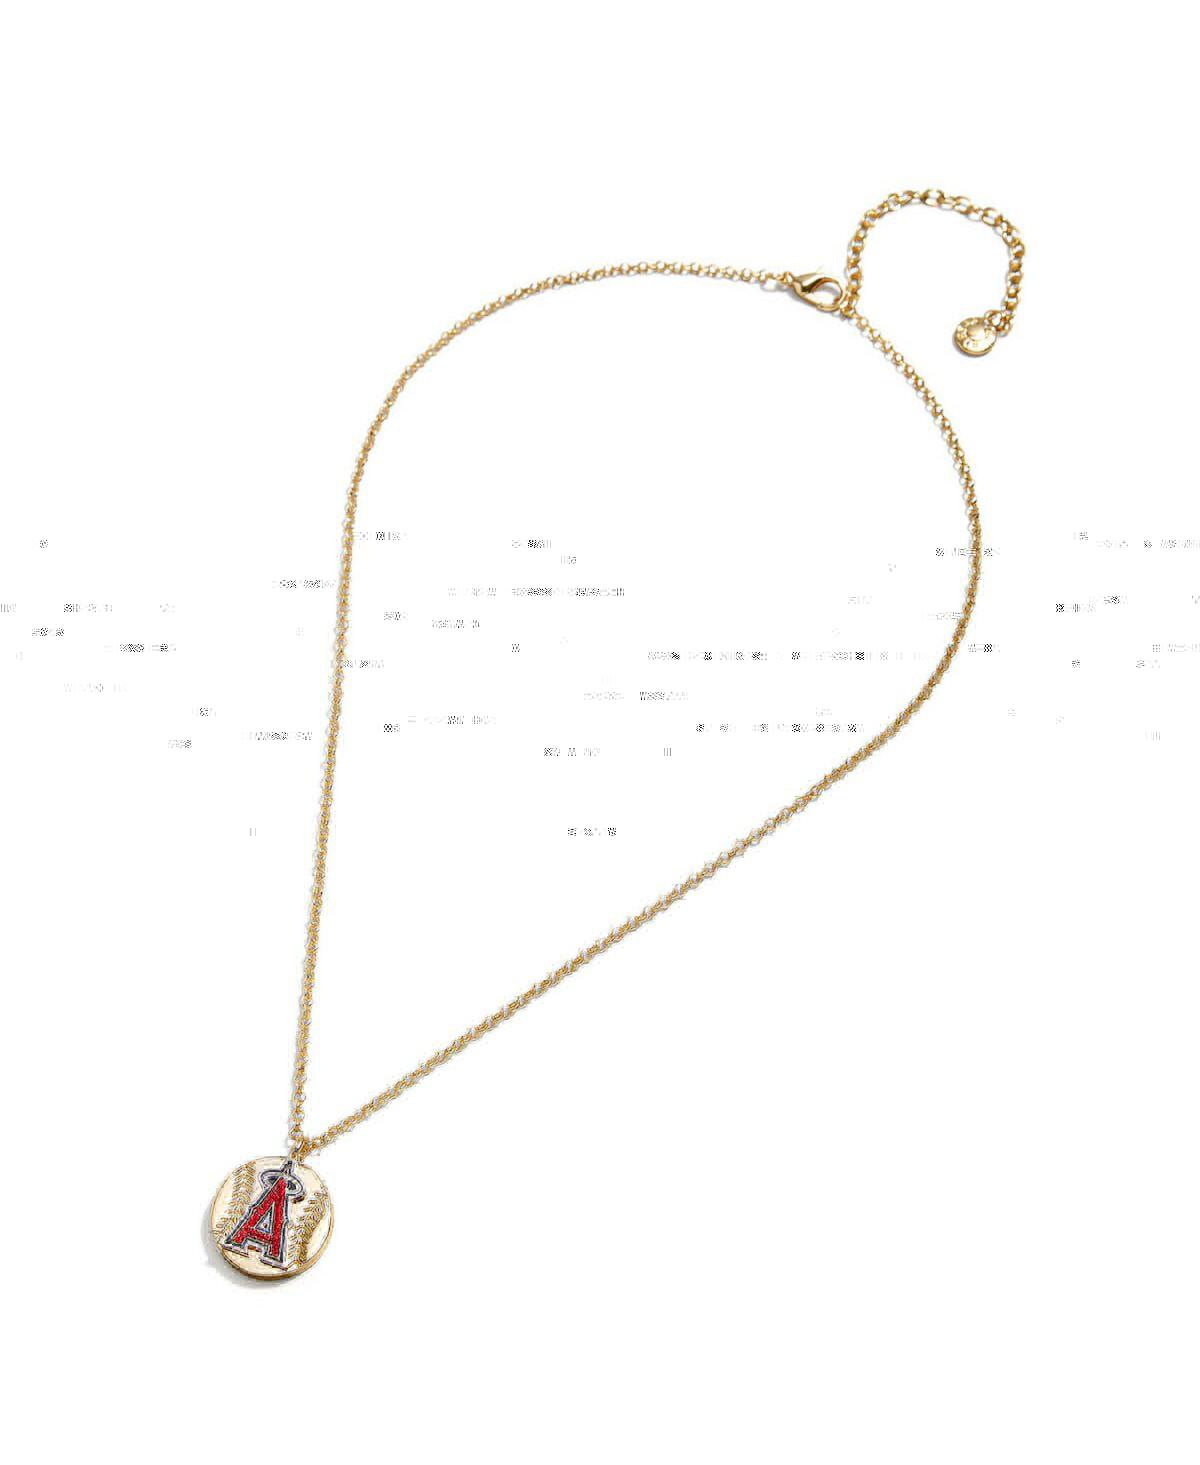 Shop Baublebar Women's  Los Angeles Angels Pendant Necklace In Gold-tone